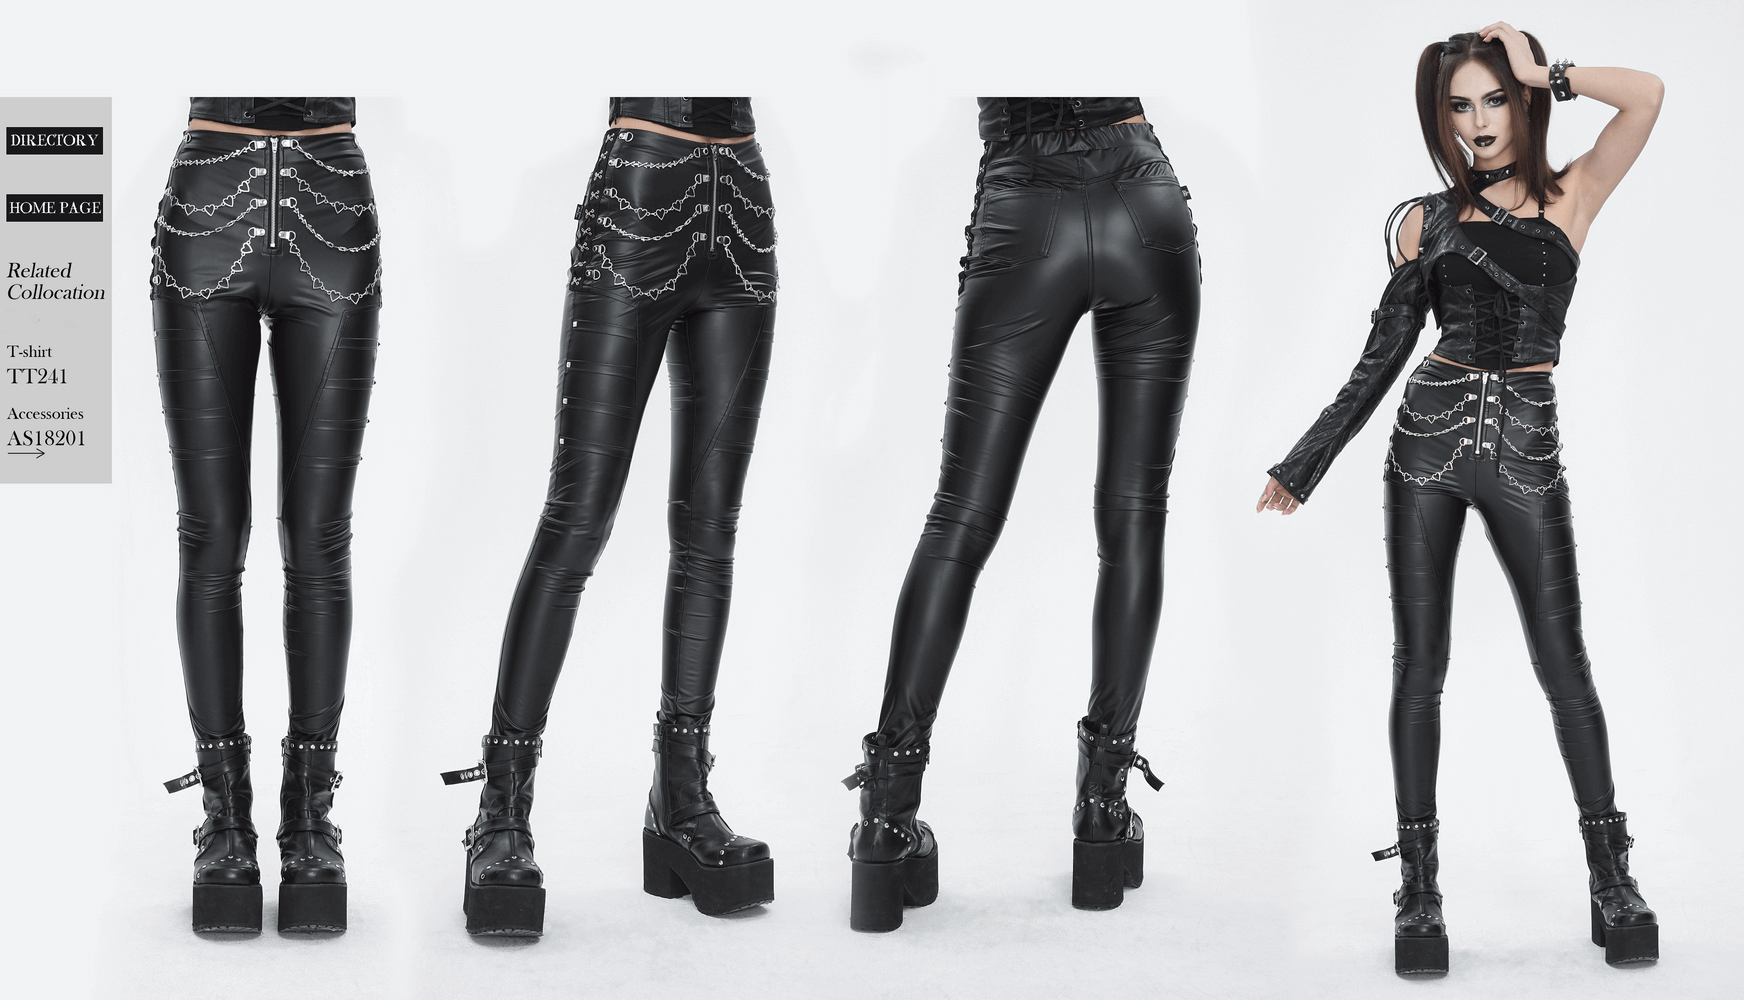 Women's Punk Slim Faux Leather Pants with Chains